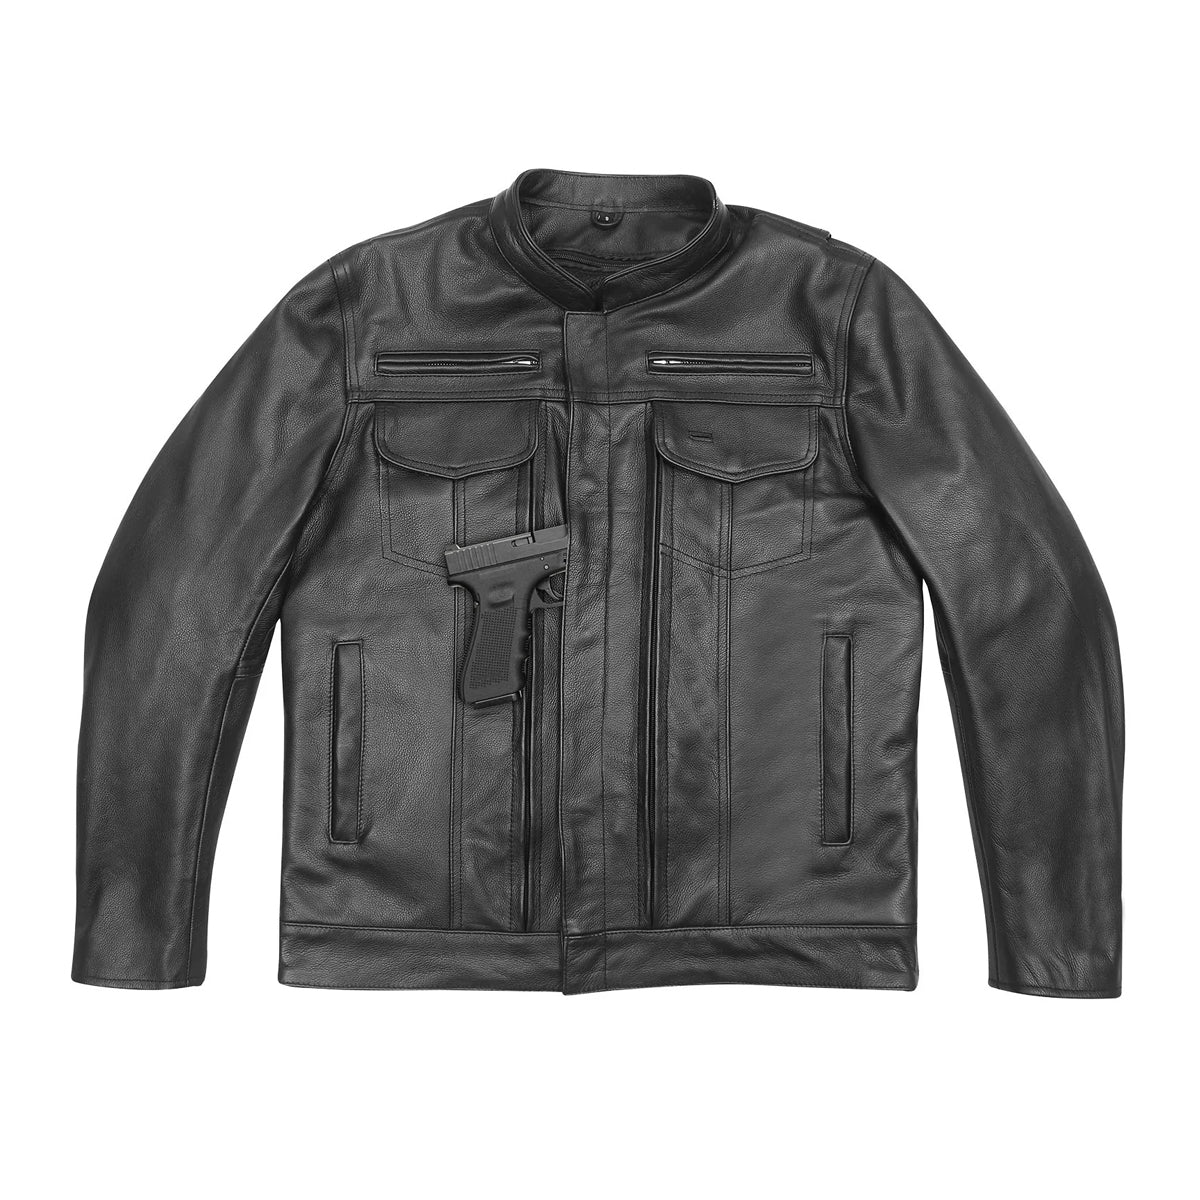 Vance Leathers' Men's Top Performer Motorcycle Leather Jacket with Double Conceal Carry Pockets